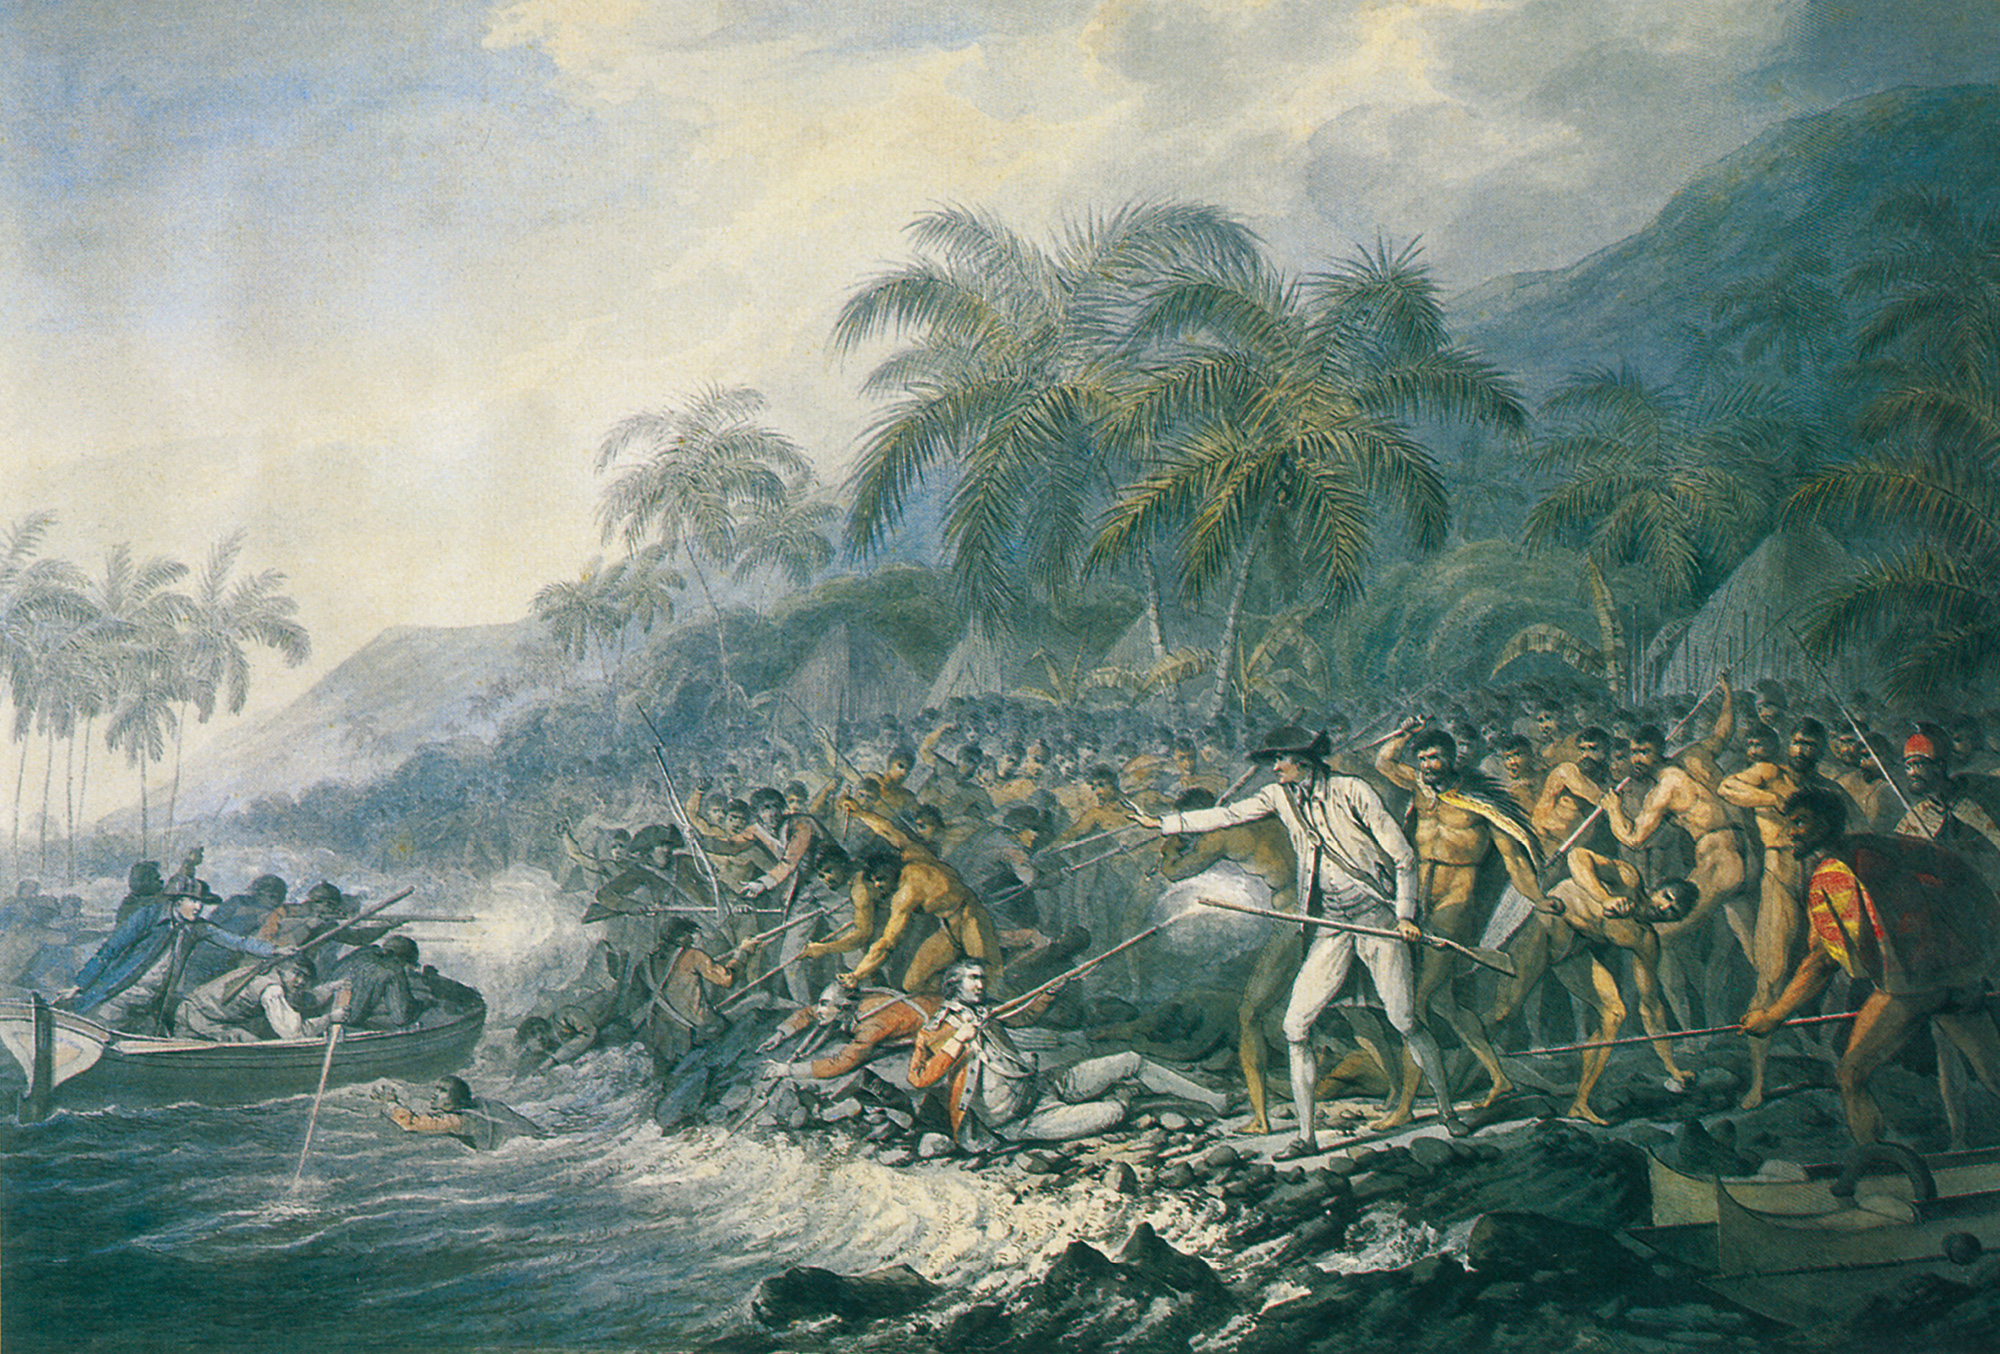 A circa seventeen eighty-one to seventeen eighty-three painting by John Webber titled “The Death of Captain Cook.”